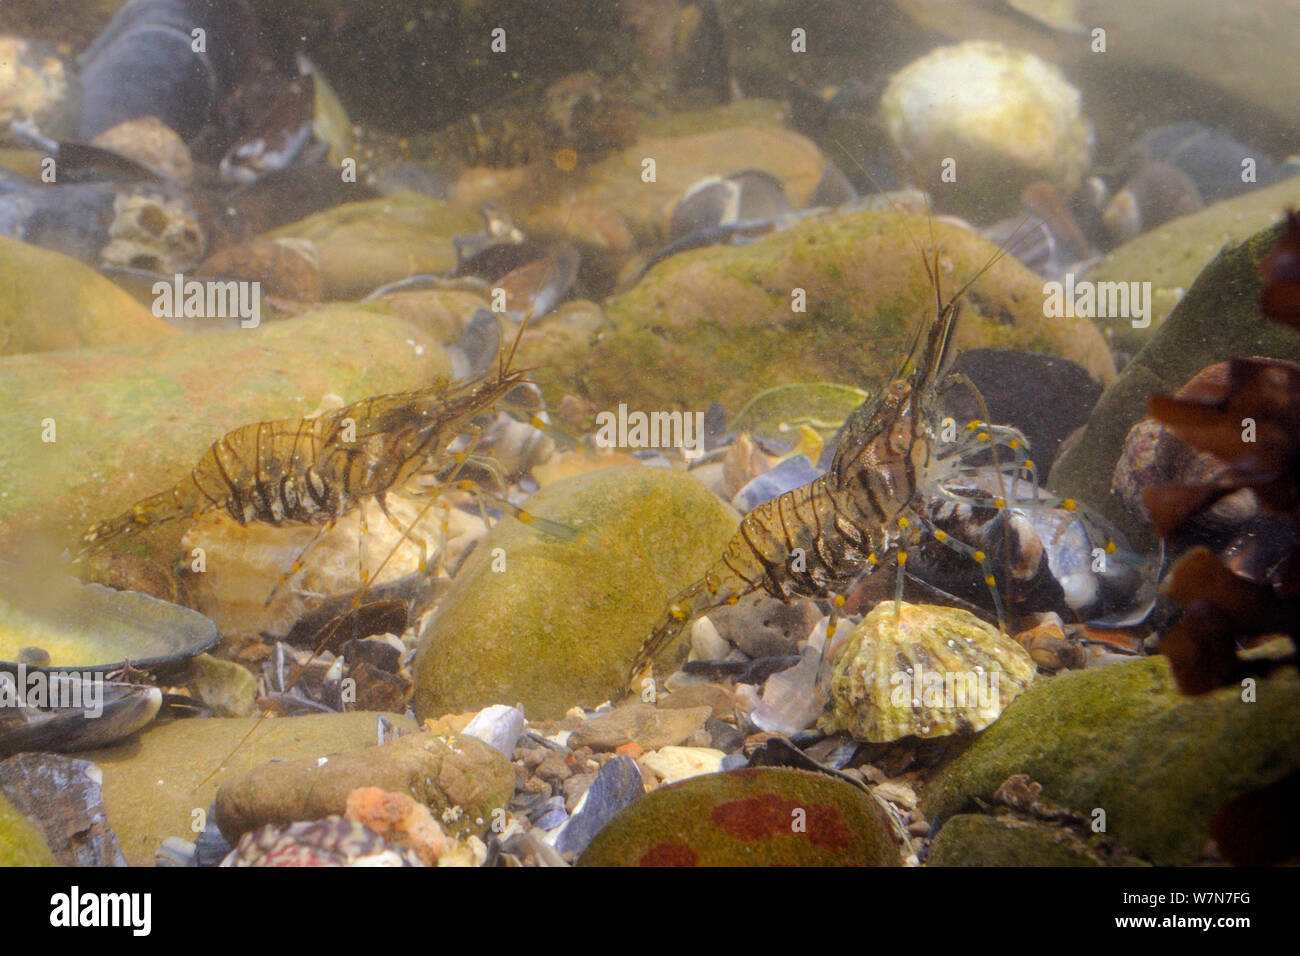 Two Common prawns (Palaemon serratus) foraging among boulders and shell fragments in a rockpool. Rhossili, The Gower Peninsula, UK, July. Stock Photo